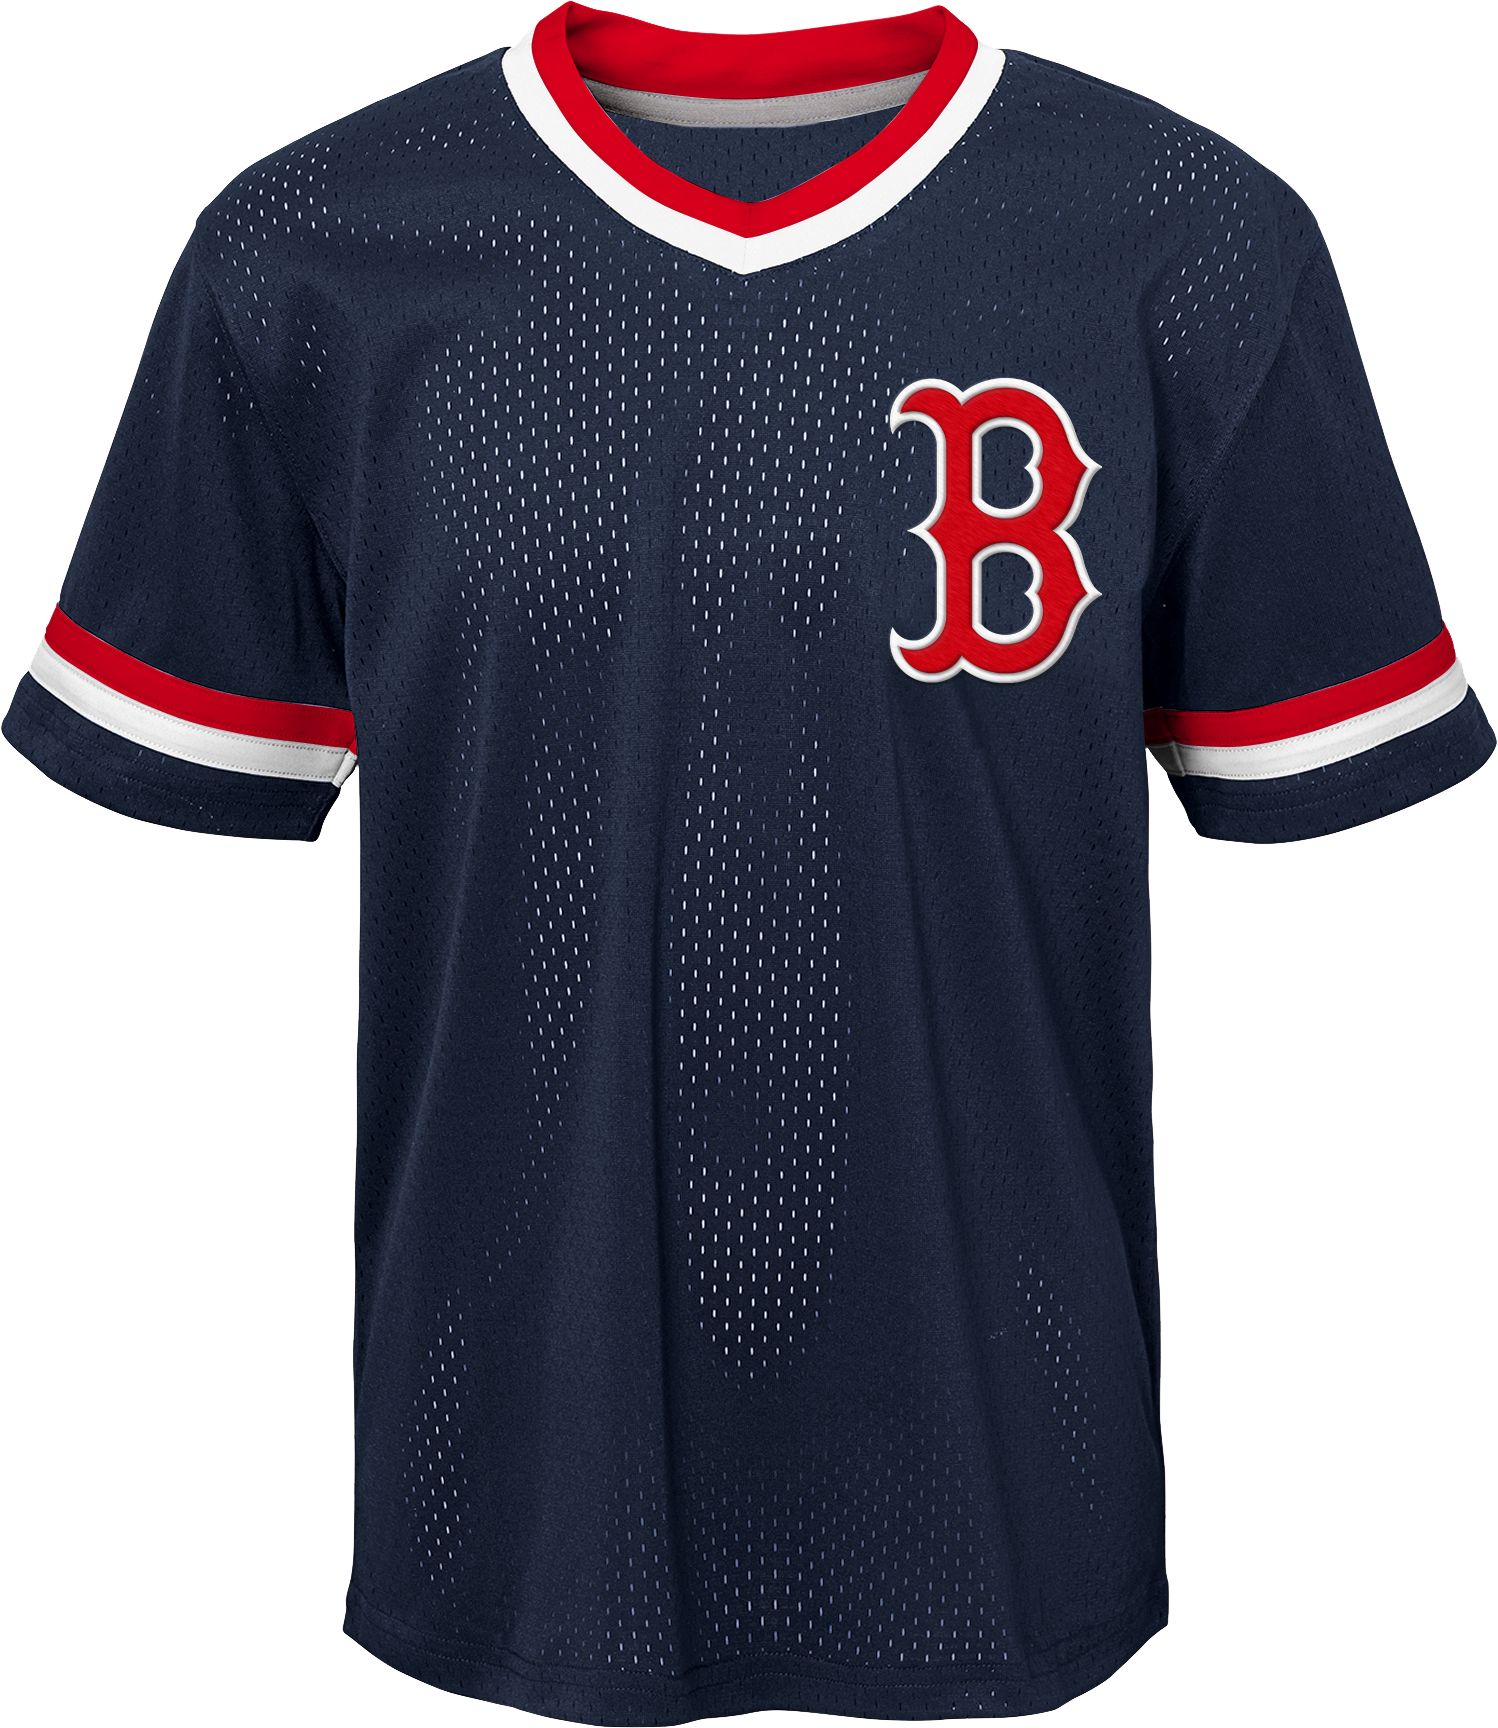 price red sox jersey